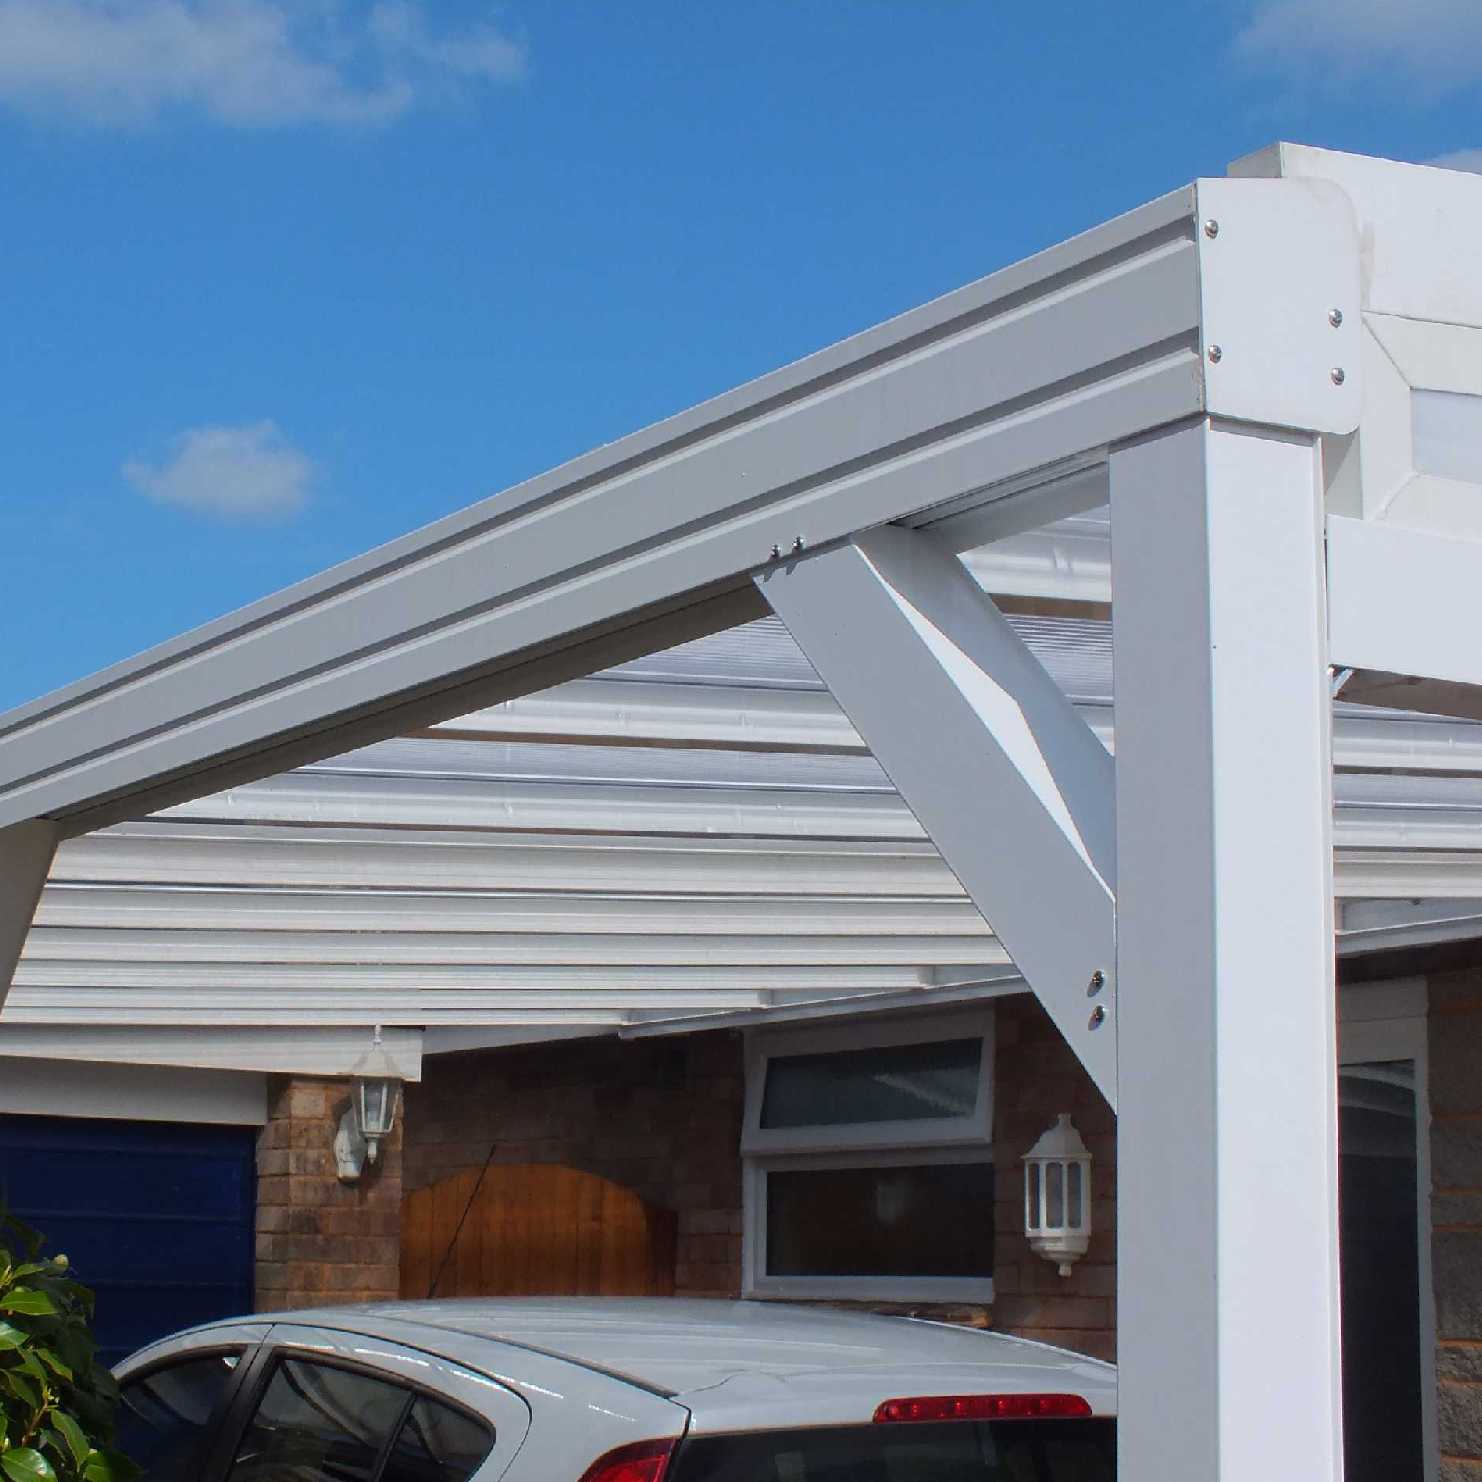 Buy Omega Smart Lean-To Canopy, White with 16mm Polycarbonate Glazing - 3.1m (W) x 2.0m (P), (2) Supporting Posts online today